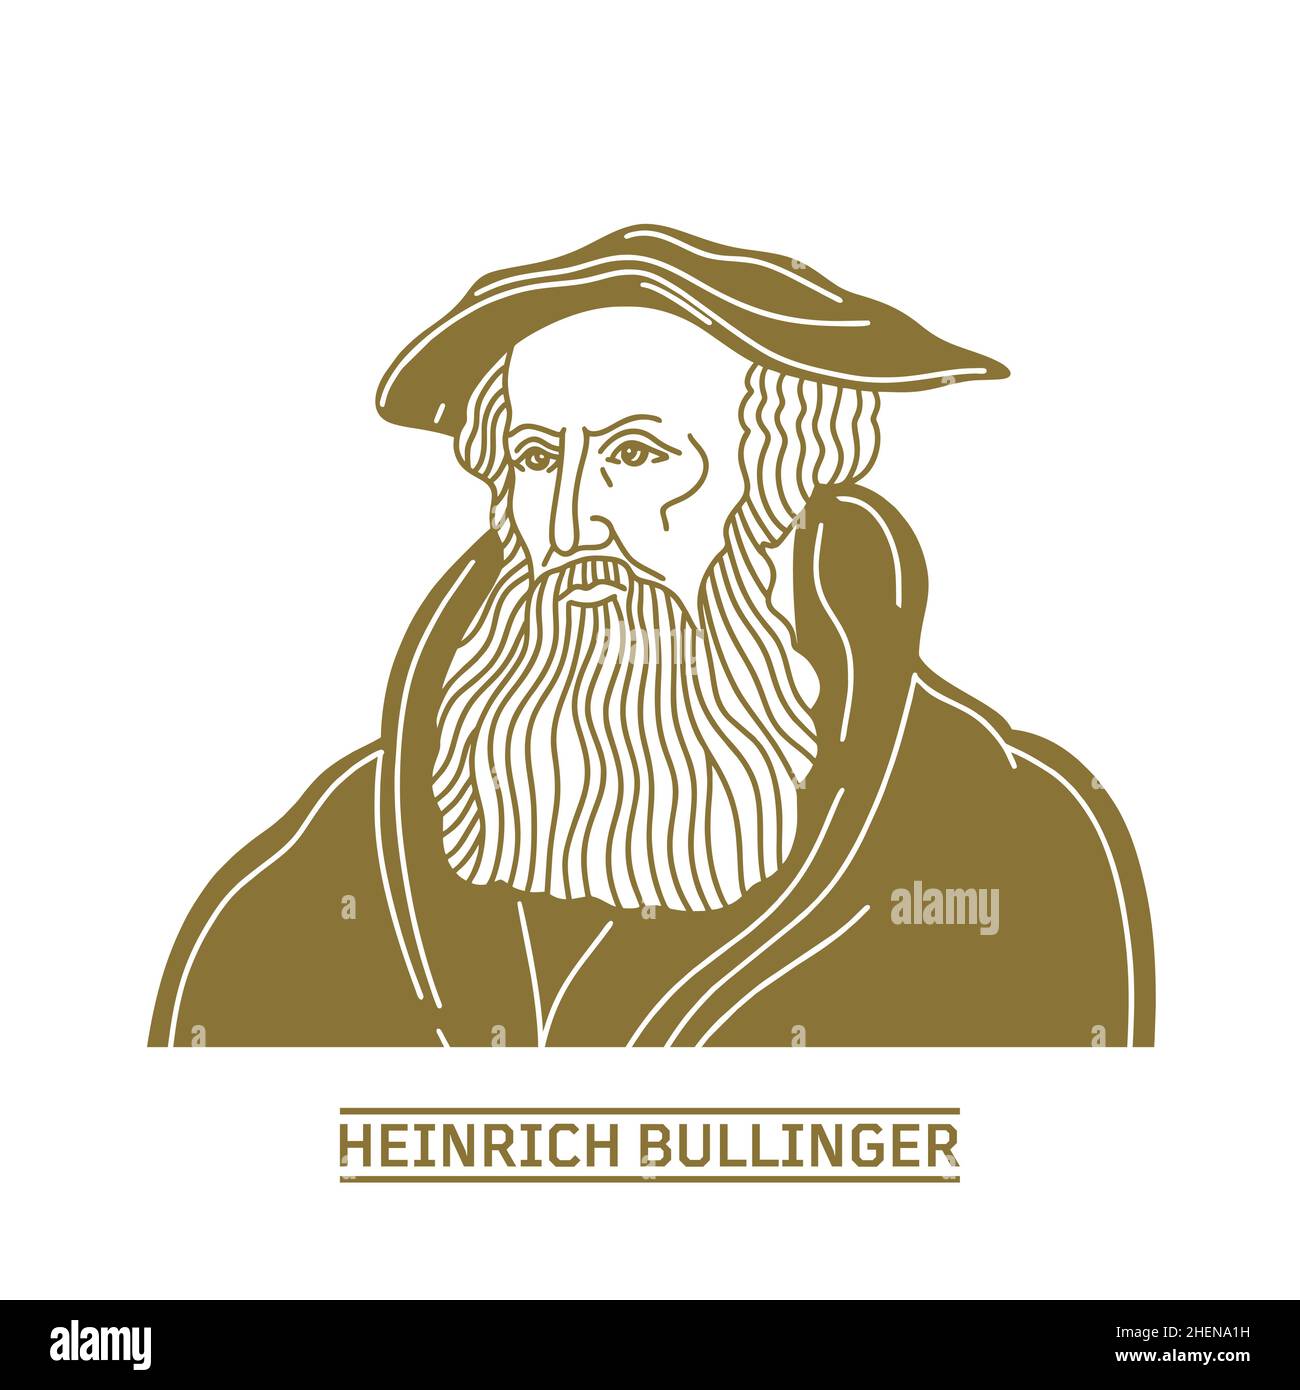 Heinrich Bullinger (1504-1575) was a Swiss reformer. He was one of the most influential theologians of the Protestant Reformation in the 16th century. Stock Vector